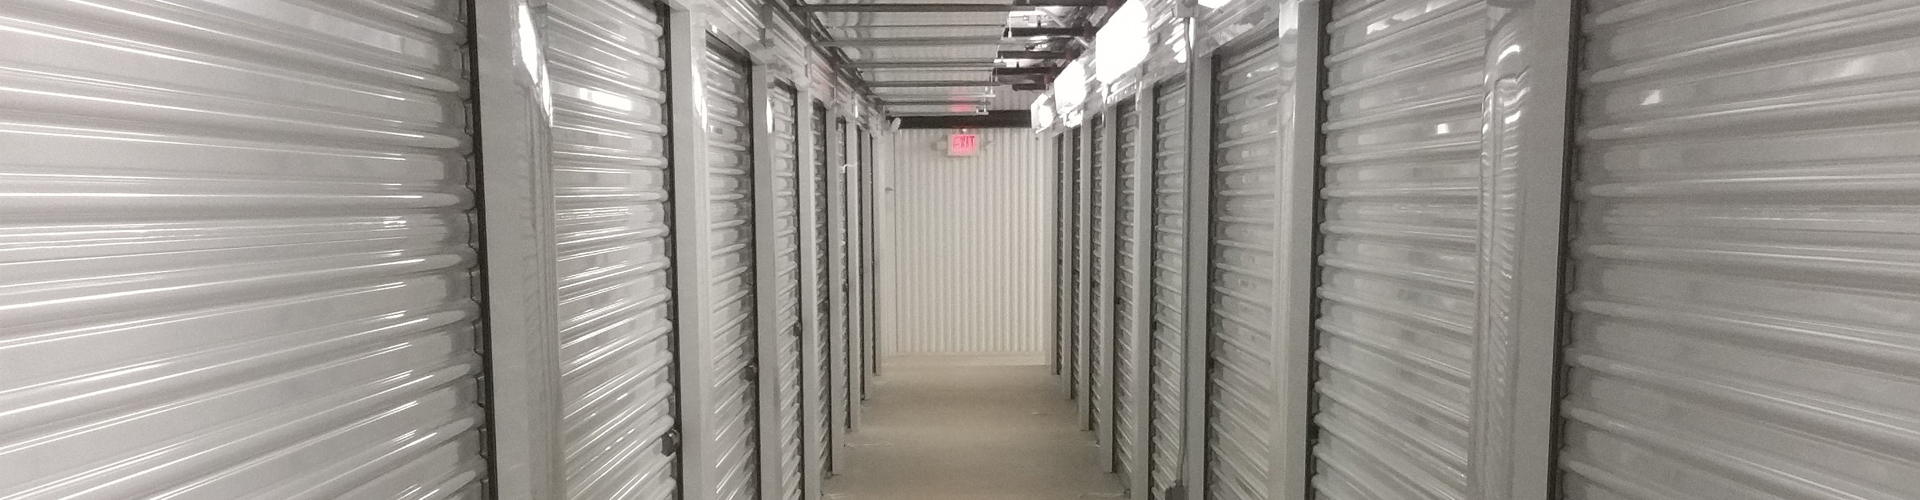 Stirling Storage in Phoenixville PA